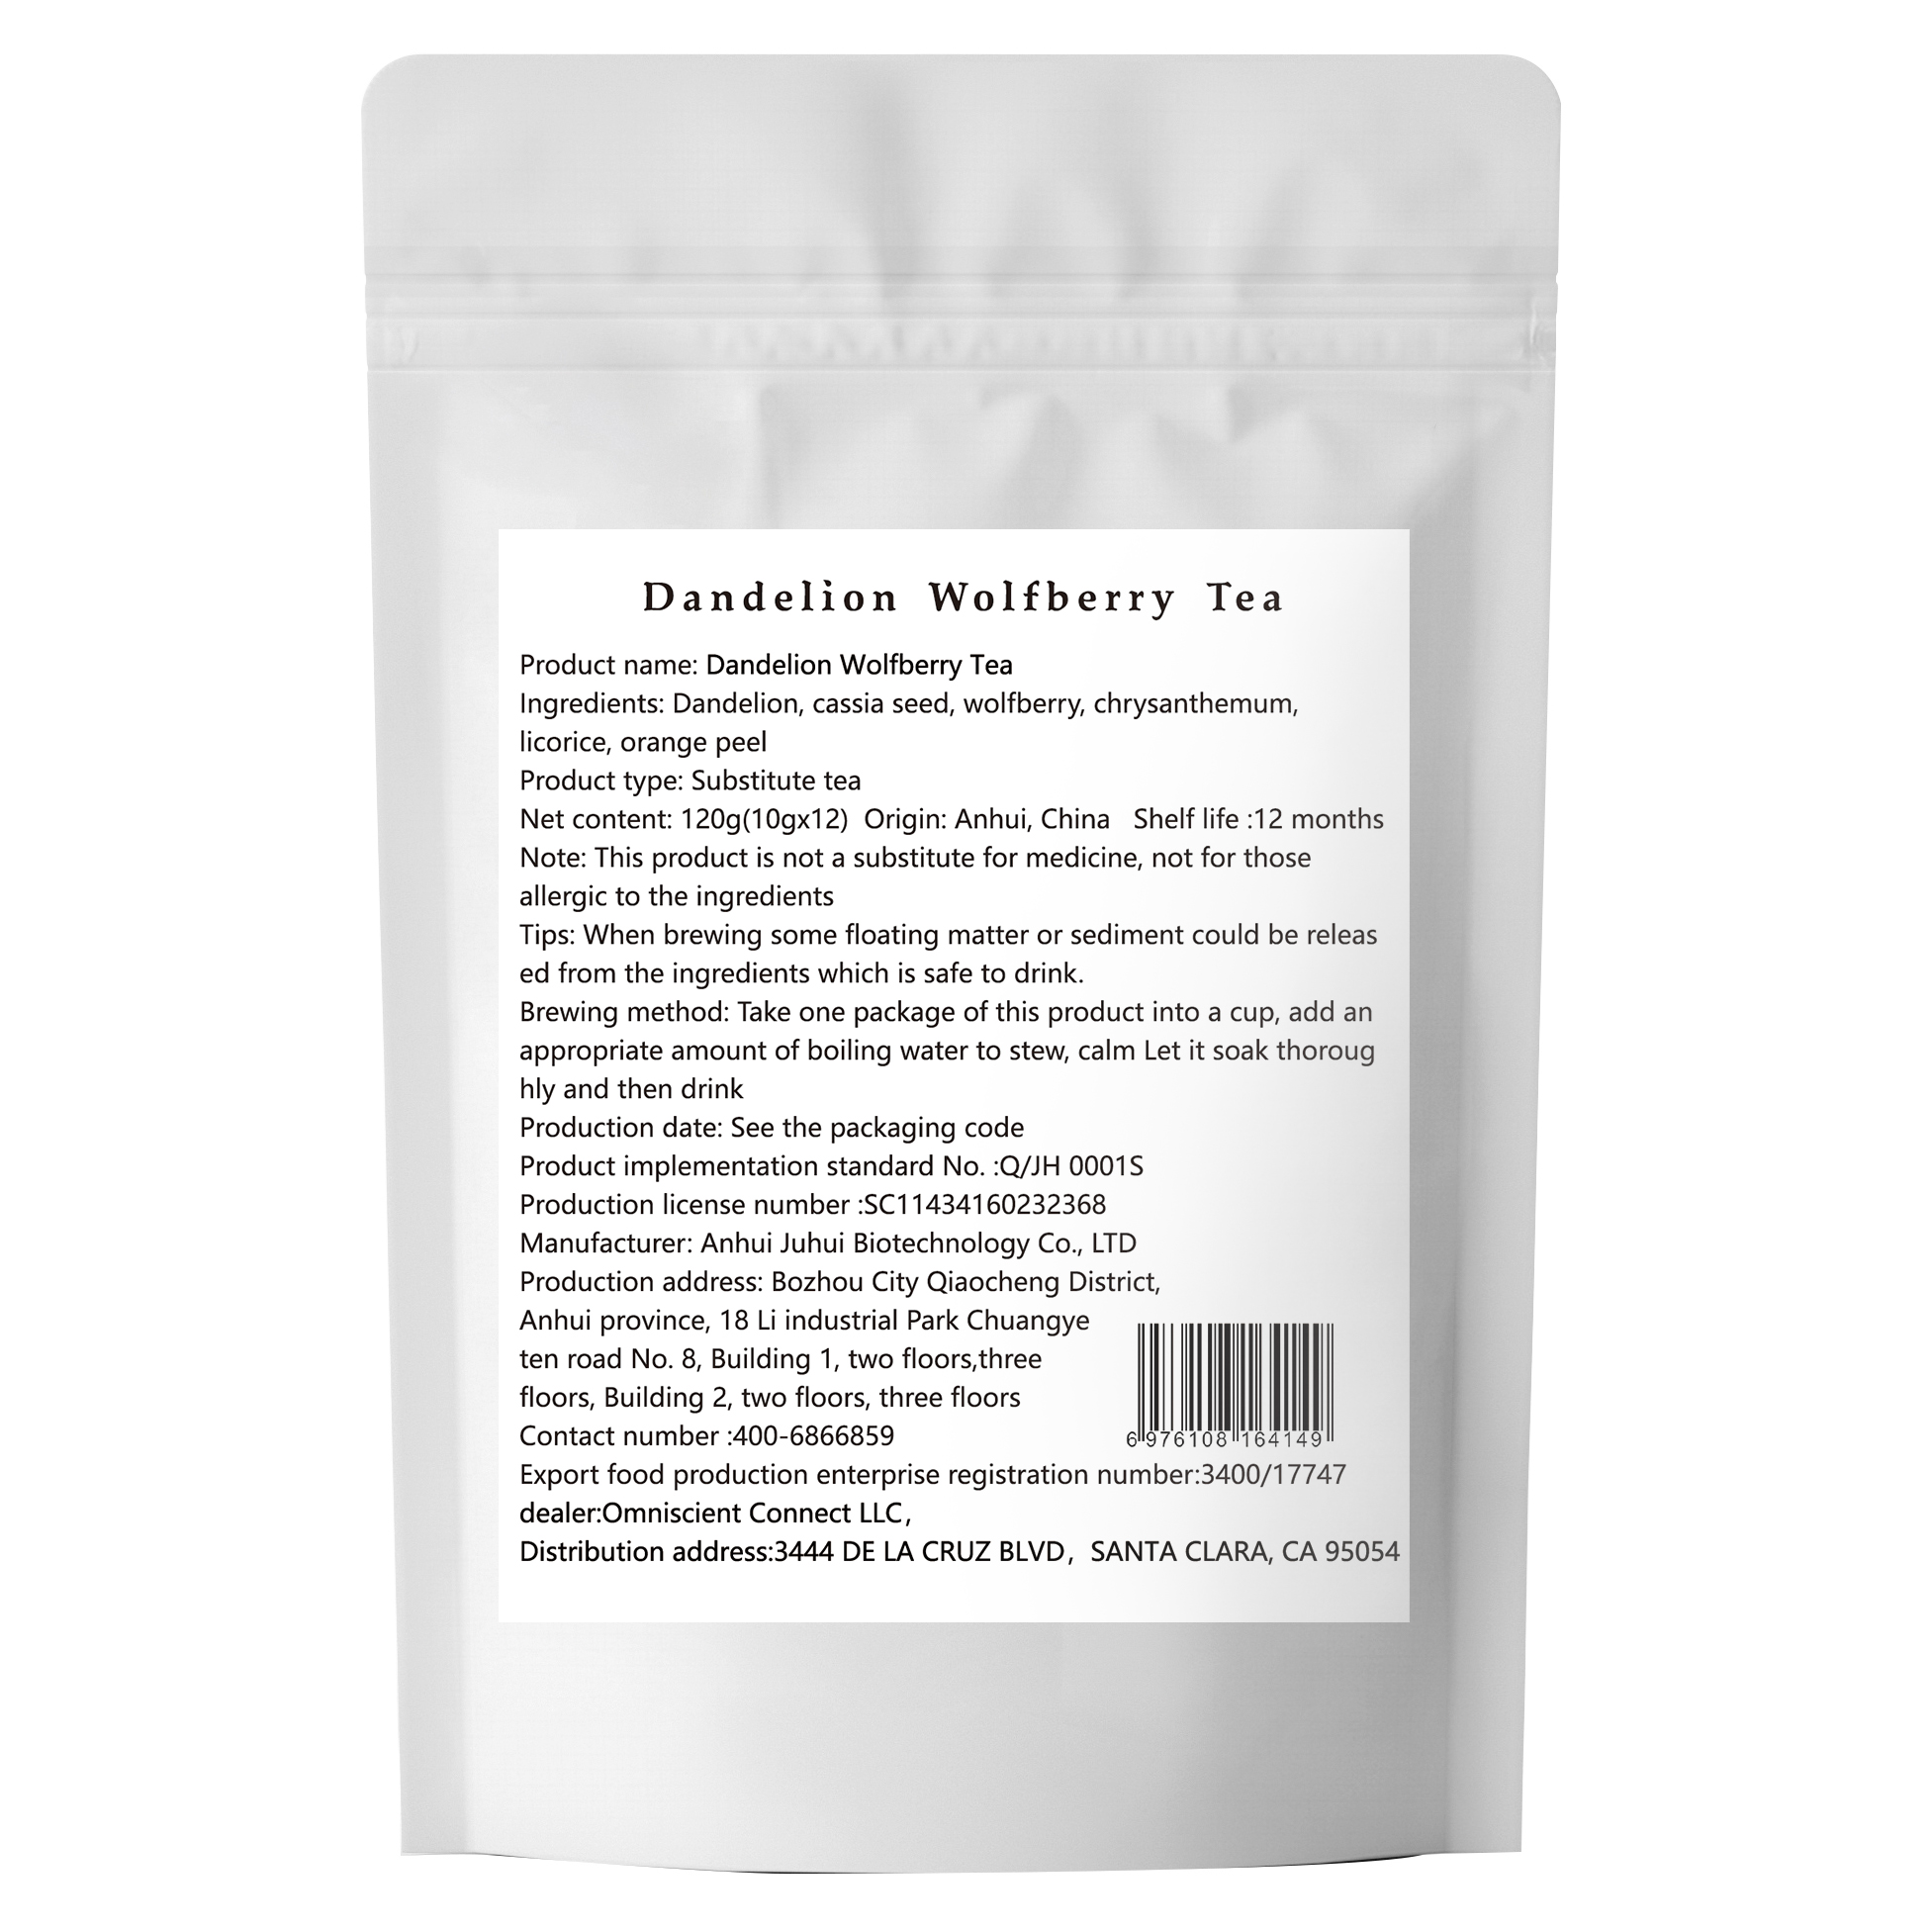 Dandelion Wolfberry Tea, Natural Liver Support Tea with Dandelion,Wolfberry, Cassia Seed and Chrysanthemum 30 Teabags per Pack